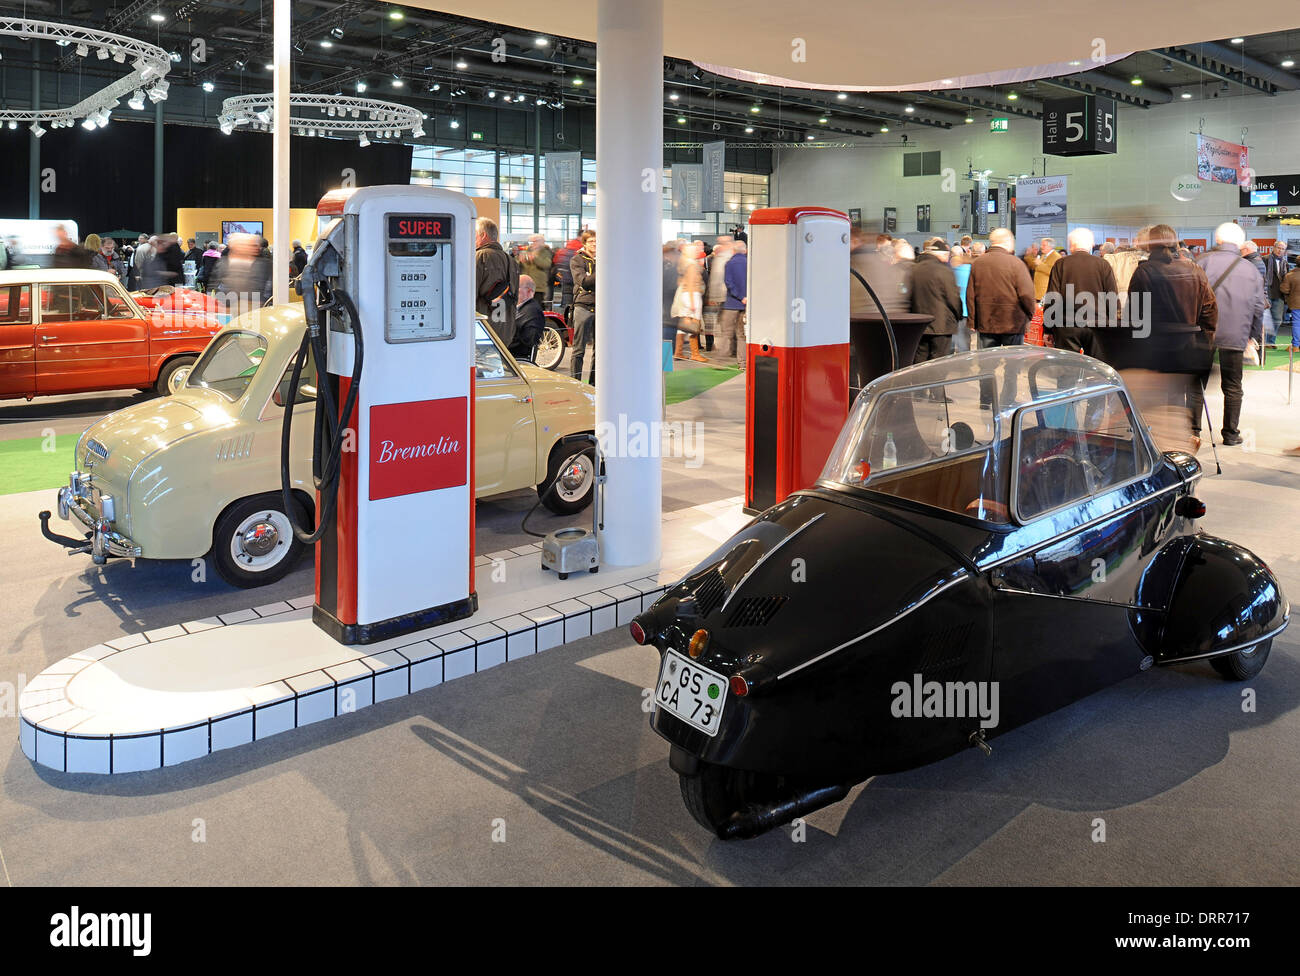 Bremen, Germany. 31st Jan, 2014. A Messerschmitt Kabinenroller at the Bremen Classic Motorshow trade fair in Bremen, Germany, 31 January 2014. The focal points of this year's classic car show is the 'economic miracle'. The fair runs until 02 February. Photo: INGO WAGNER/dpa/Alamy Live News Stock Photo